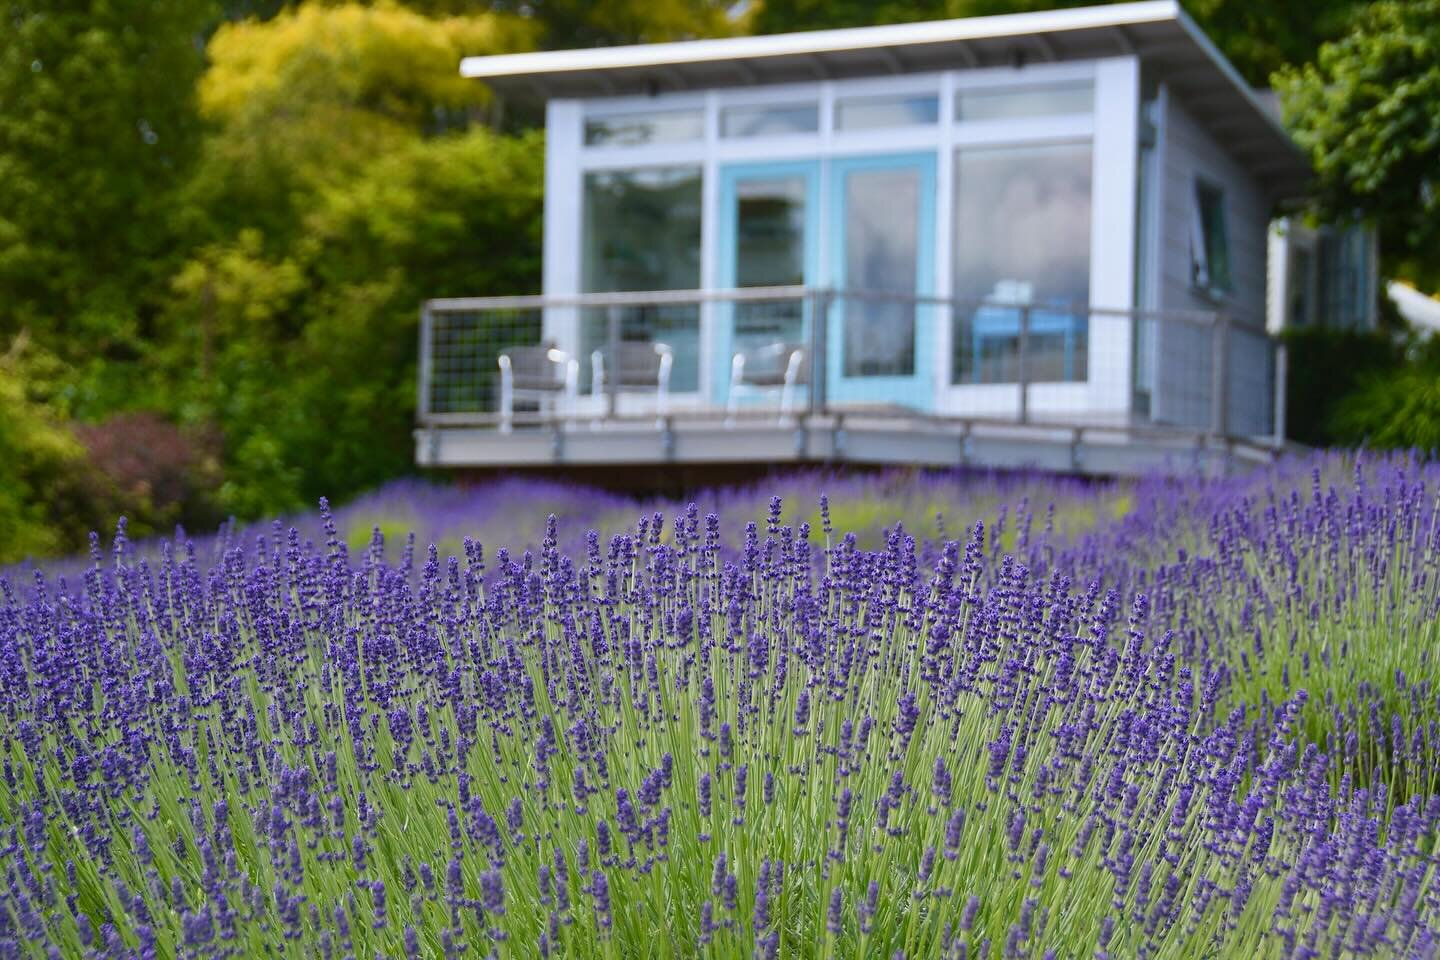 Our studio guesthouse, Betty&rsquo;s Blue, is available to book starting April 1st! Nestled among the lavender, this studio is a perfect island getaway with views of the harbor that can&rsquo;t be beat! 
Check it out on Airbnb and VRBO! Link in bio.
